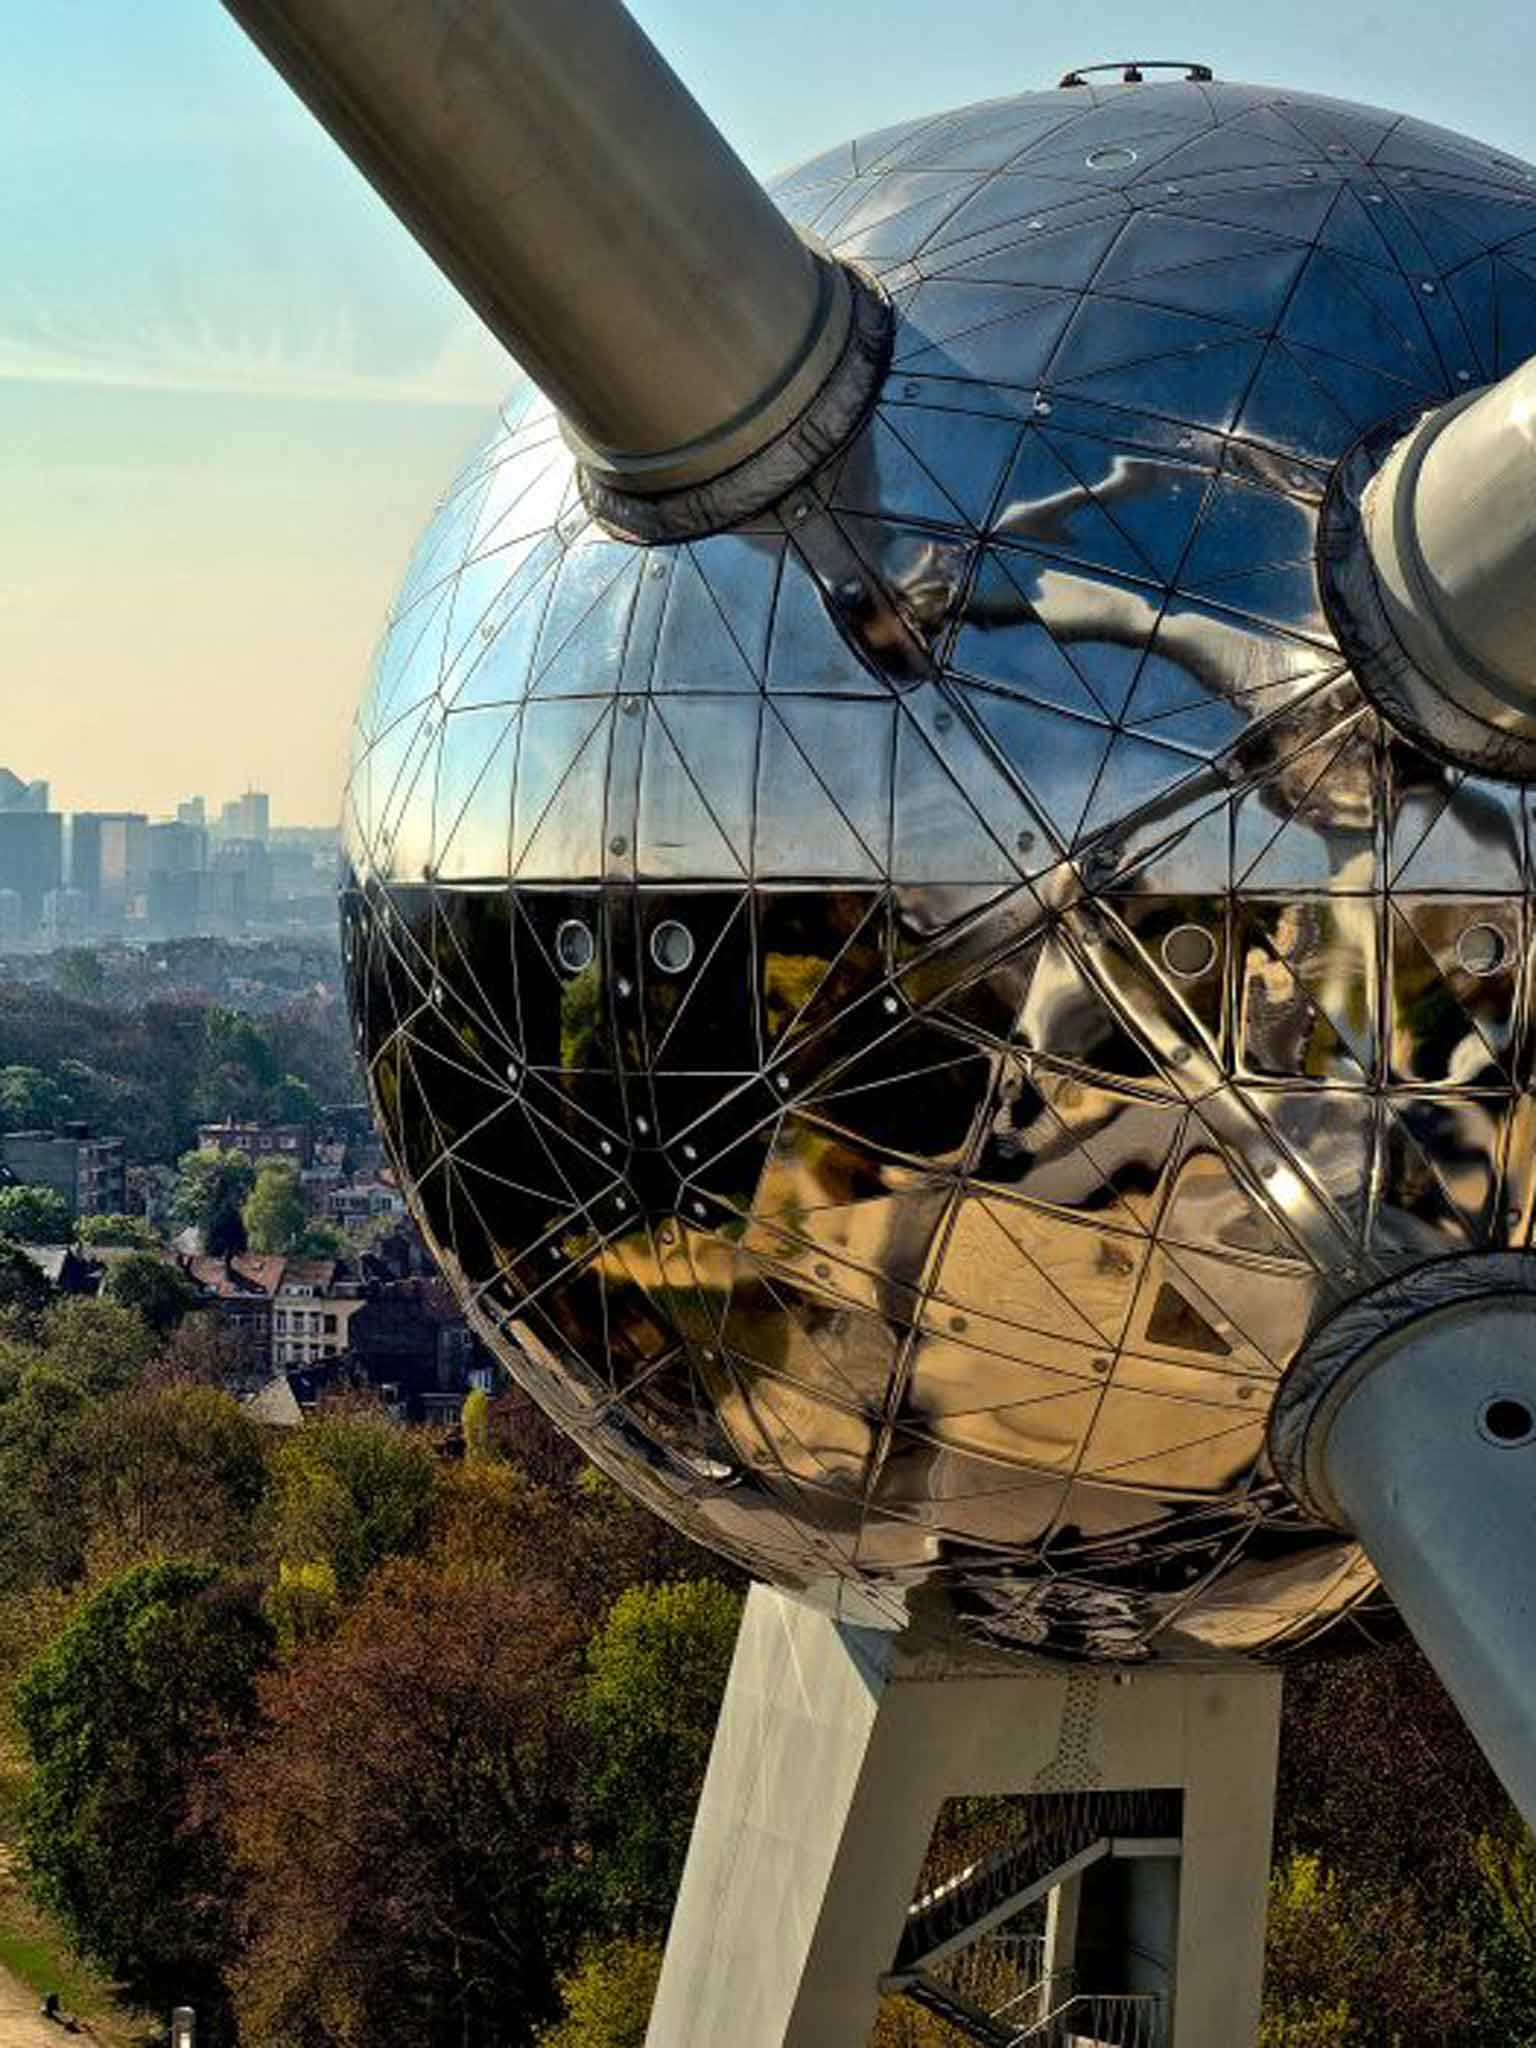 Sphere delight: great views from the Atomium